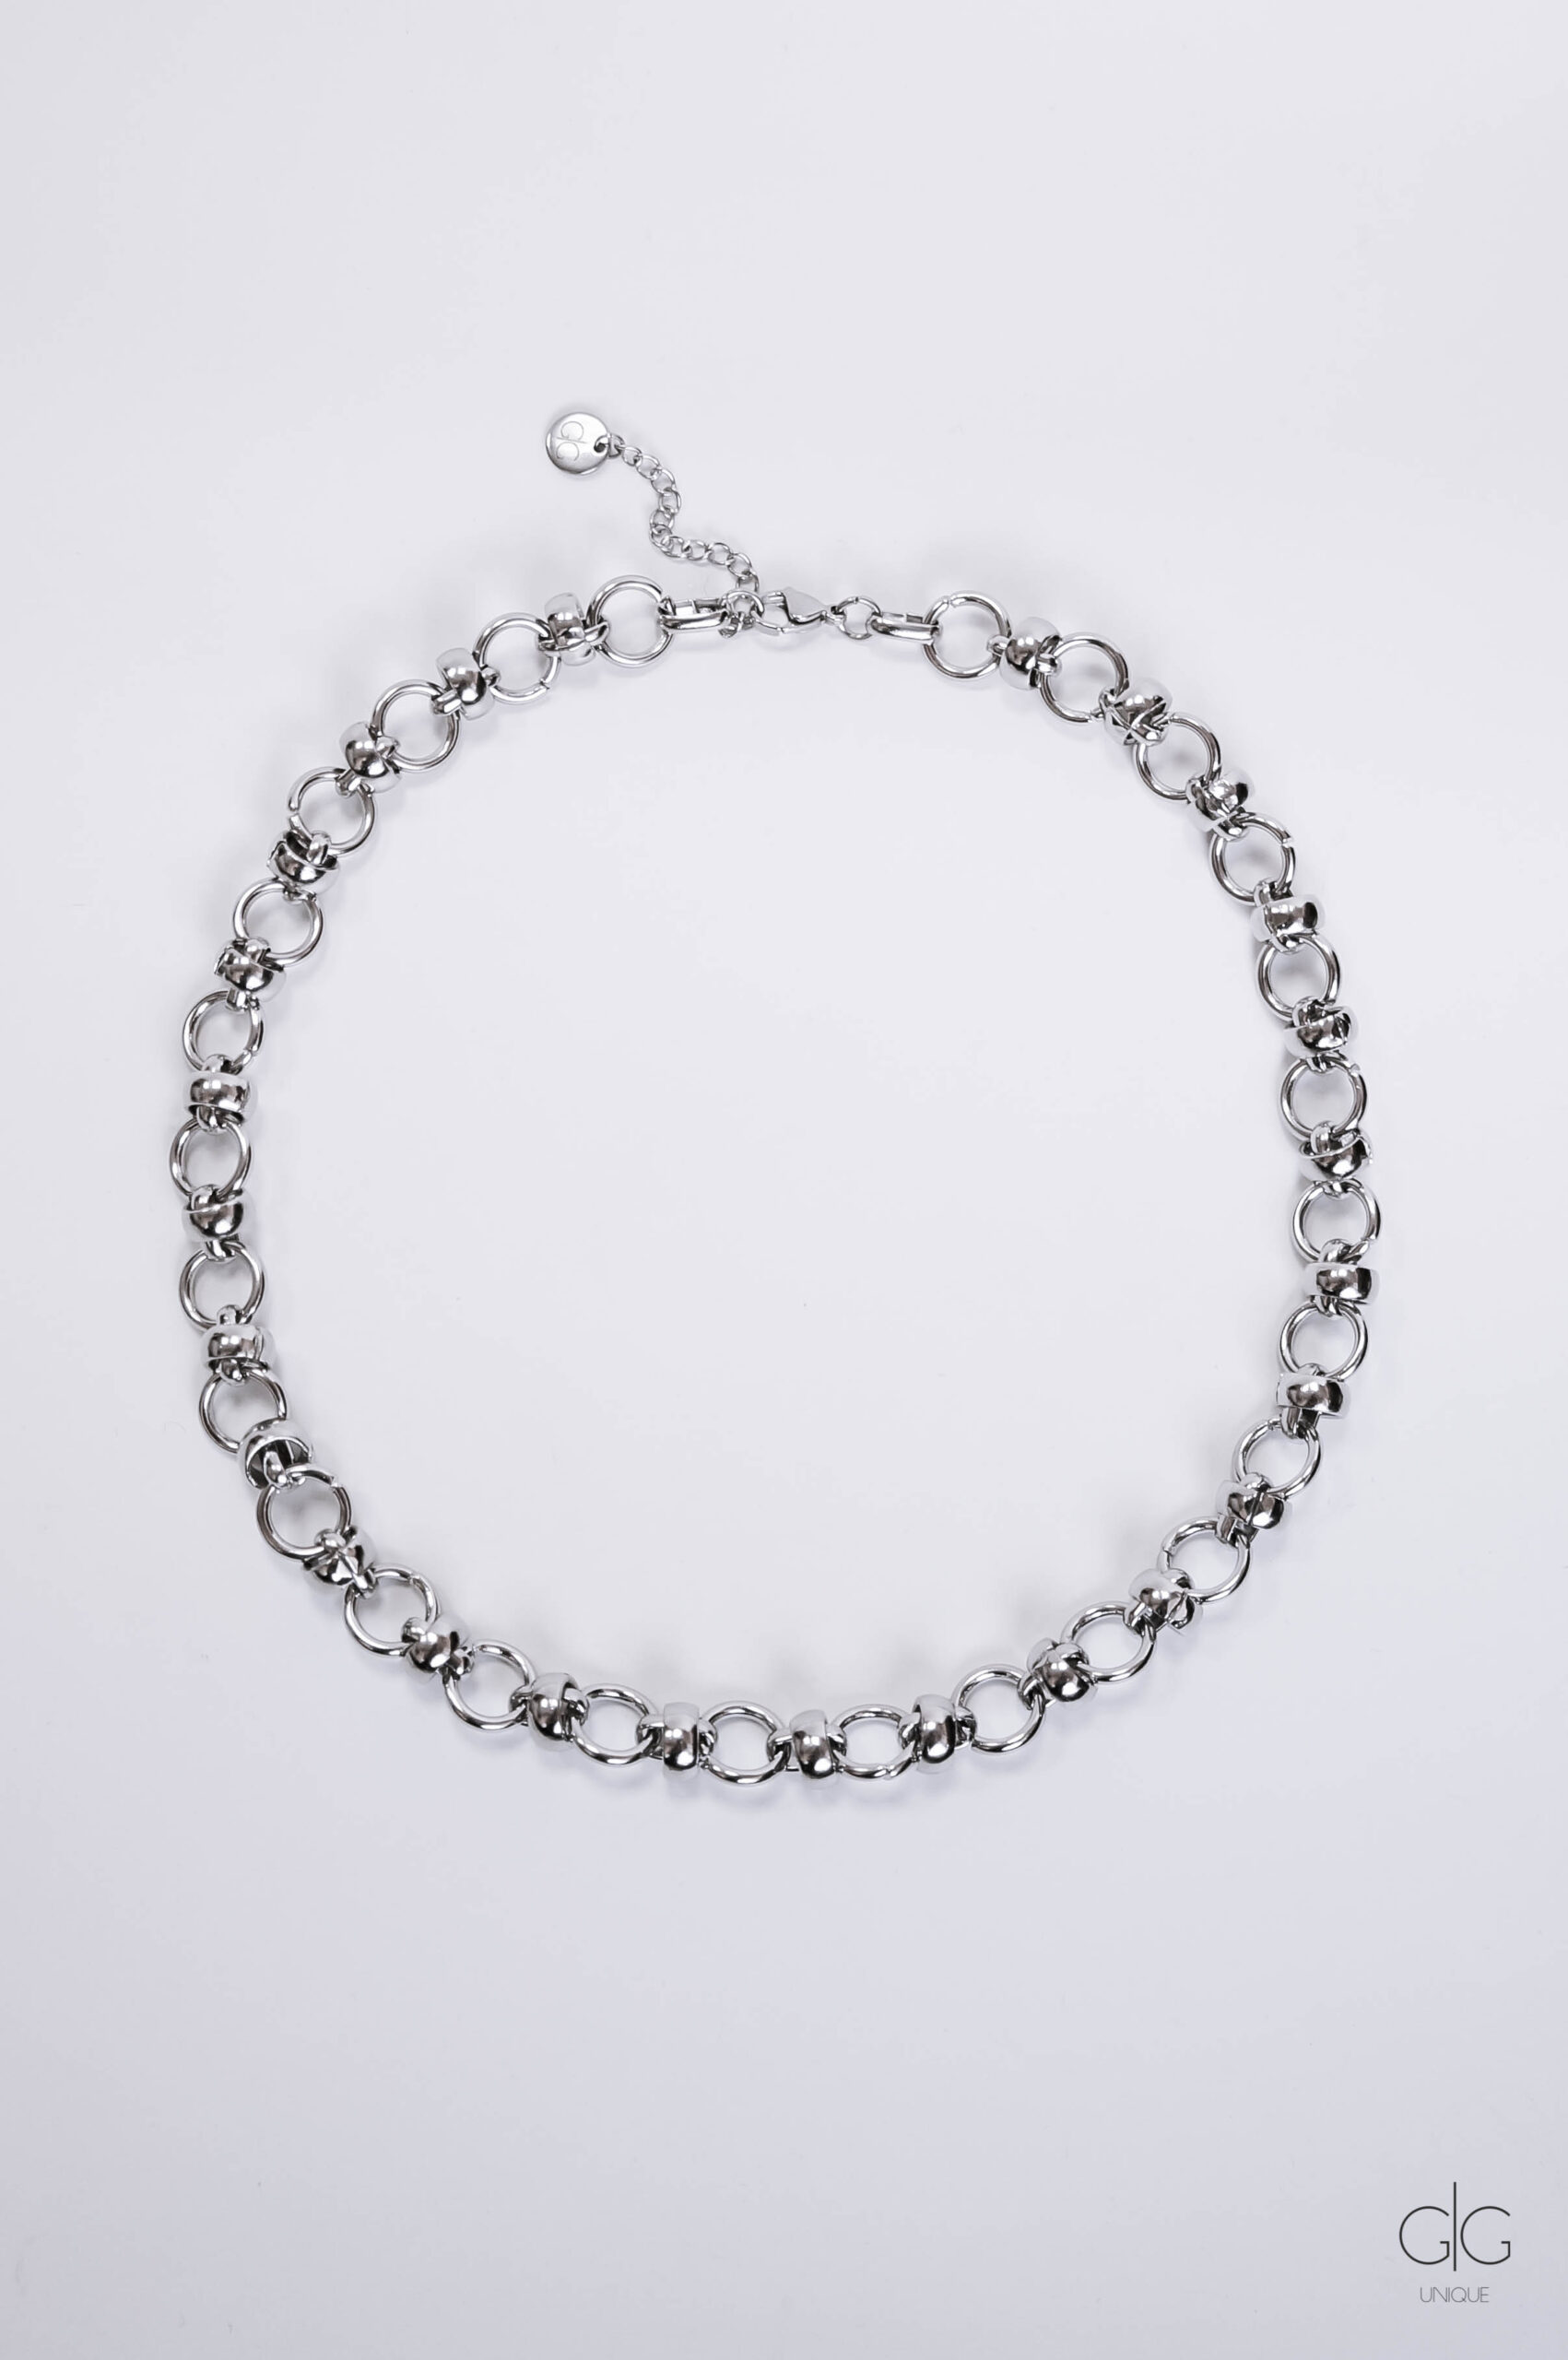 Stainless steel chain necklace - GG UNIQUE